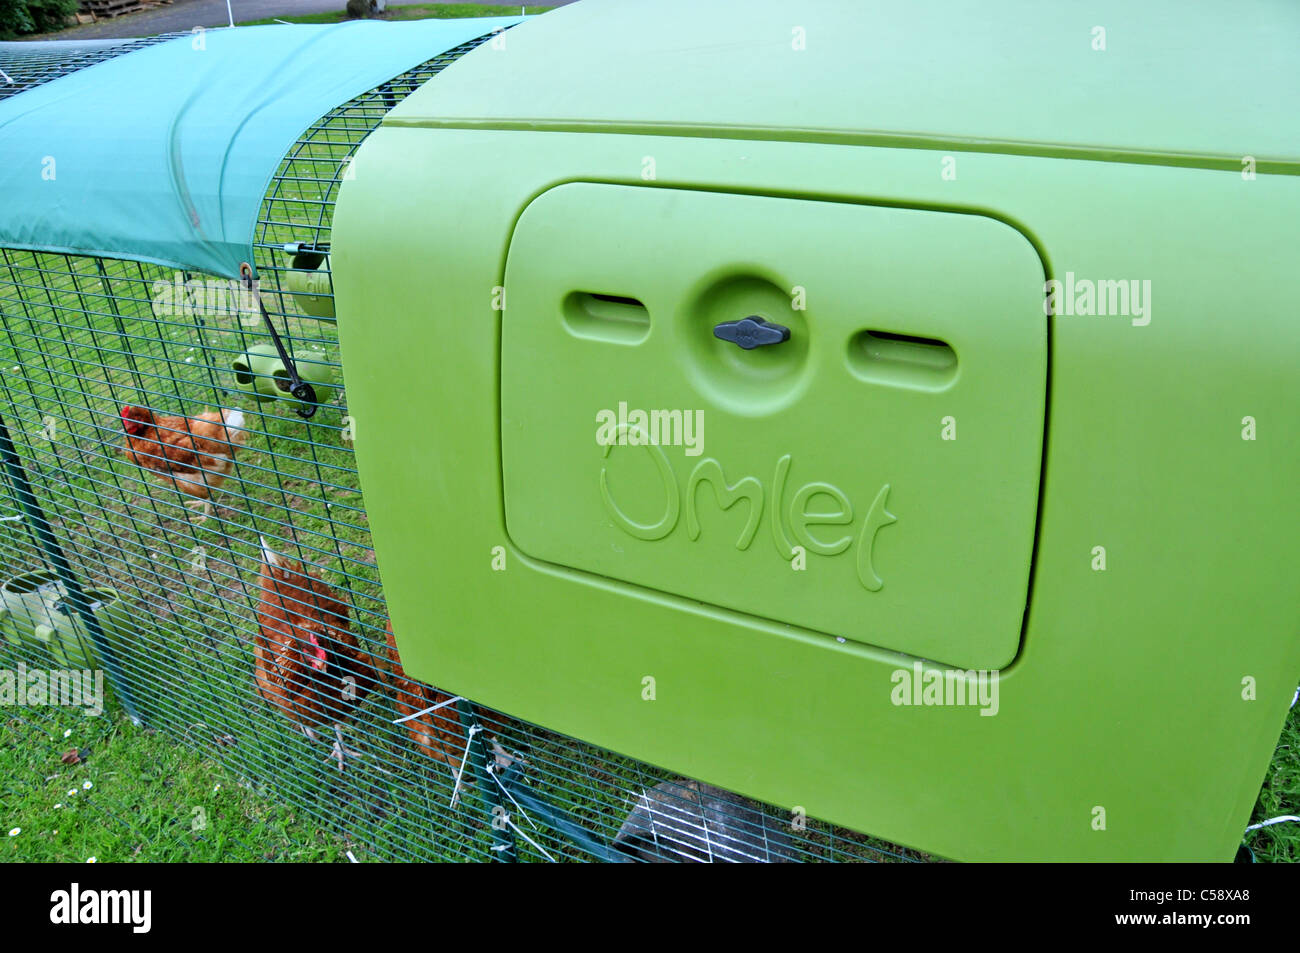 Omlet Chicken coop chicken house chickens eggs laying feeding housing Stock Photo